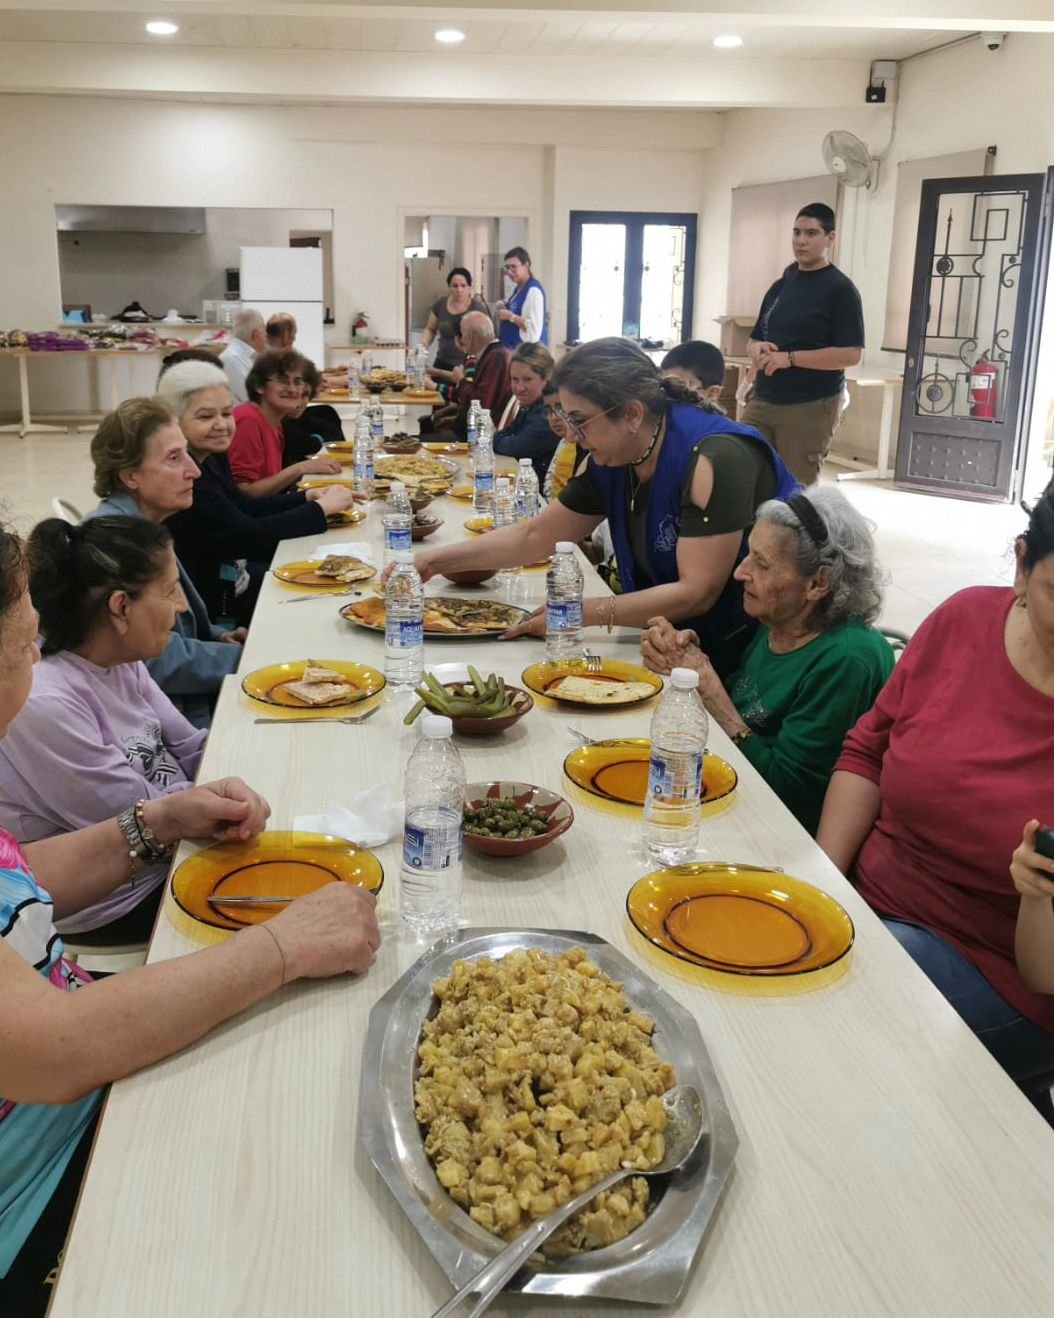 Laughter, stories, and delicious food were just a few of the highlights from DTCare and Beit el Diyafeh's successful event for the elderly community. 🤝 In a heartwarming day filled with joy and compassion, we were reminded of the power of human conn